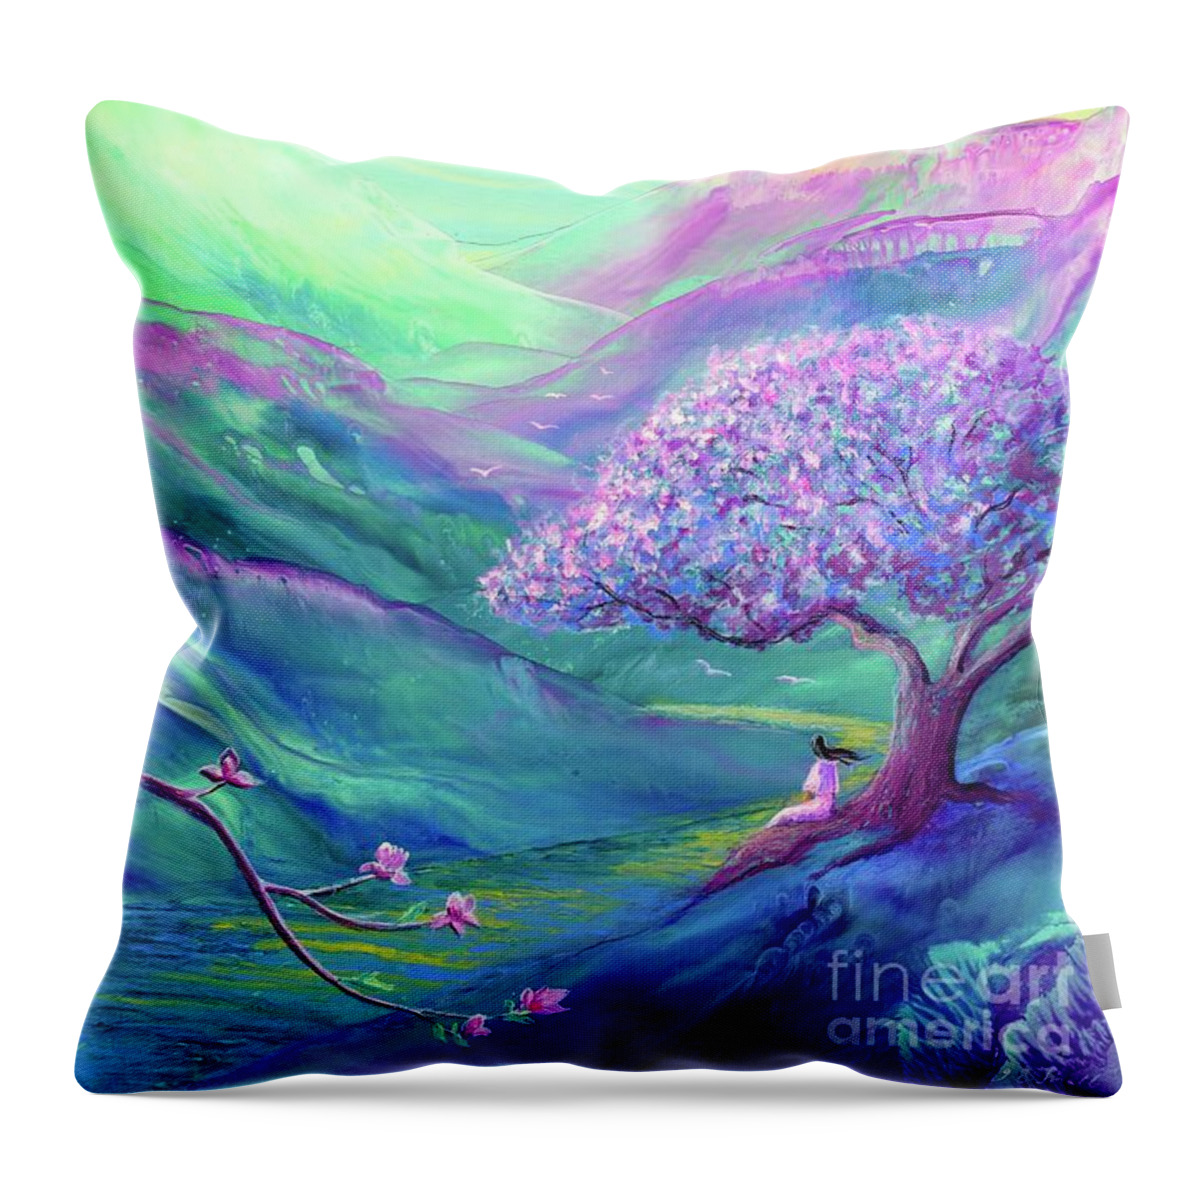 Meditation Throw Pillow featuring the painting Moment of Serenity by Jane Small